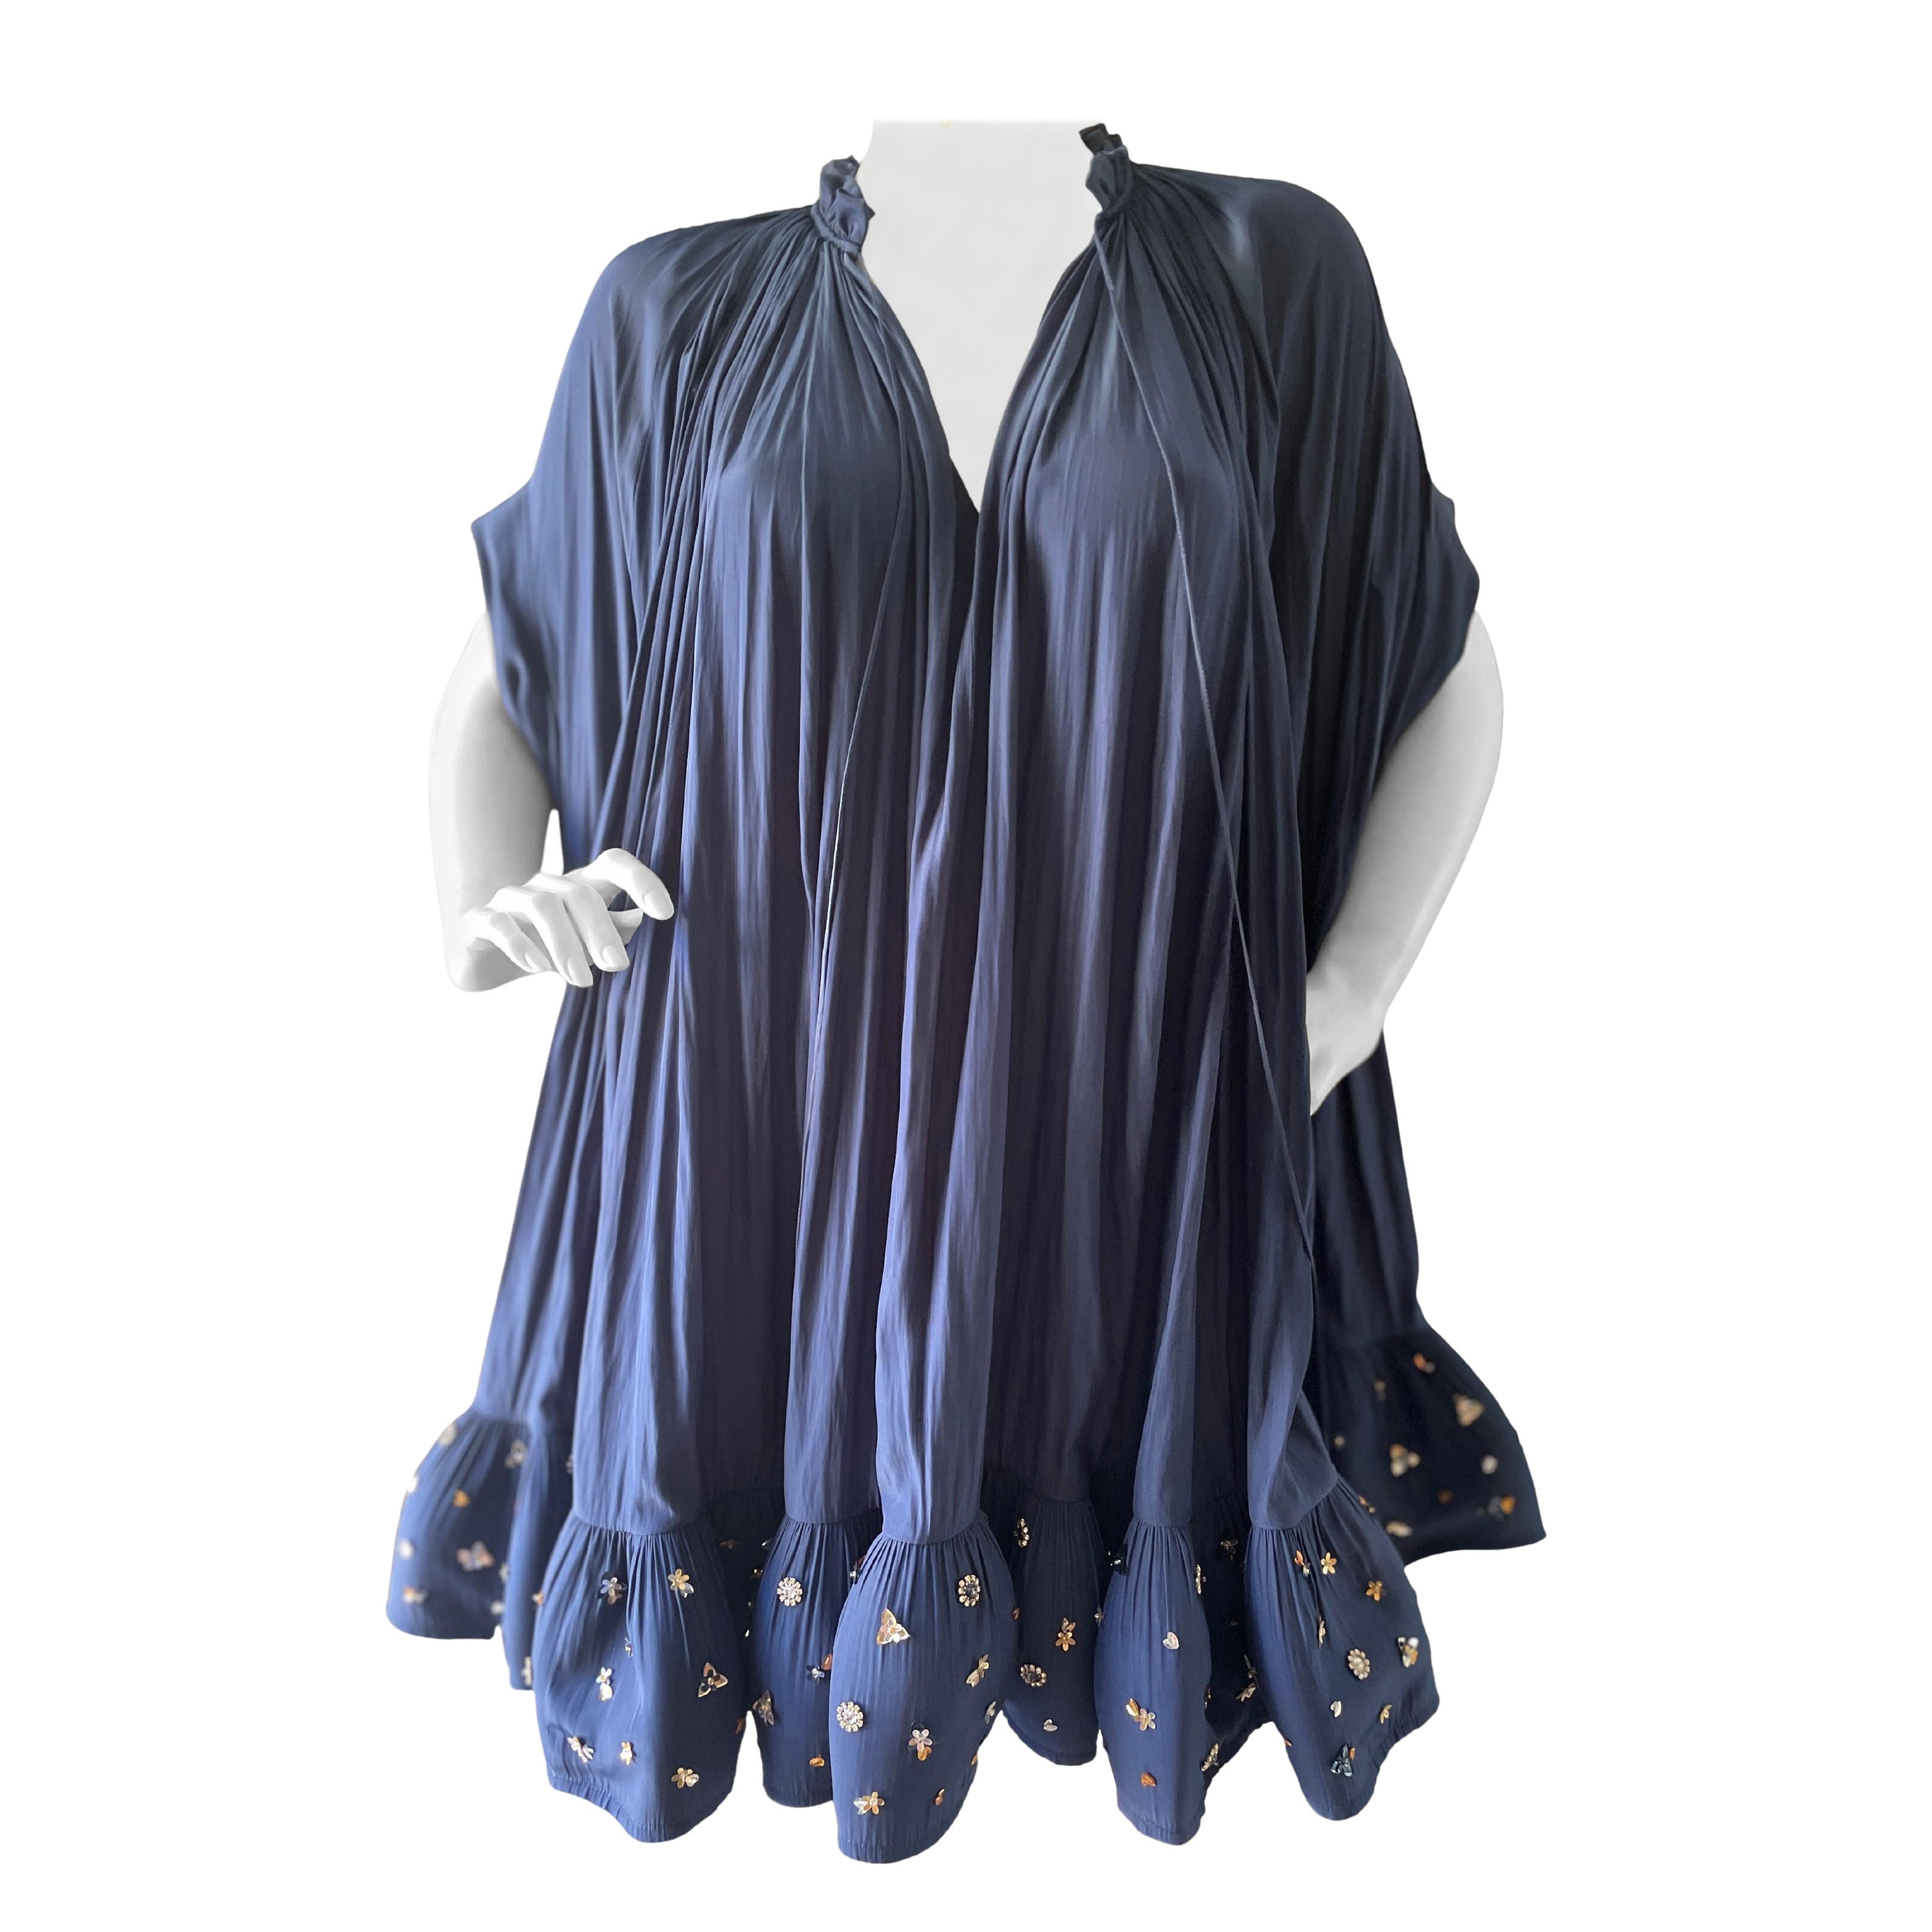 Lanvin by Alber Elbaz Voluminous Navy Blue Pleated Embellished Cocktail Dress  For Sale